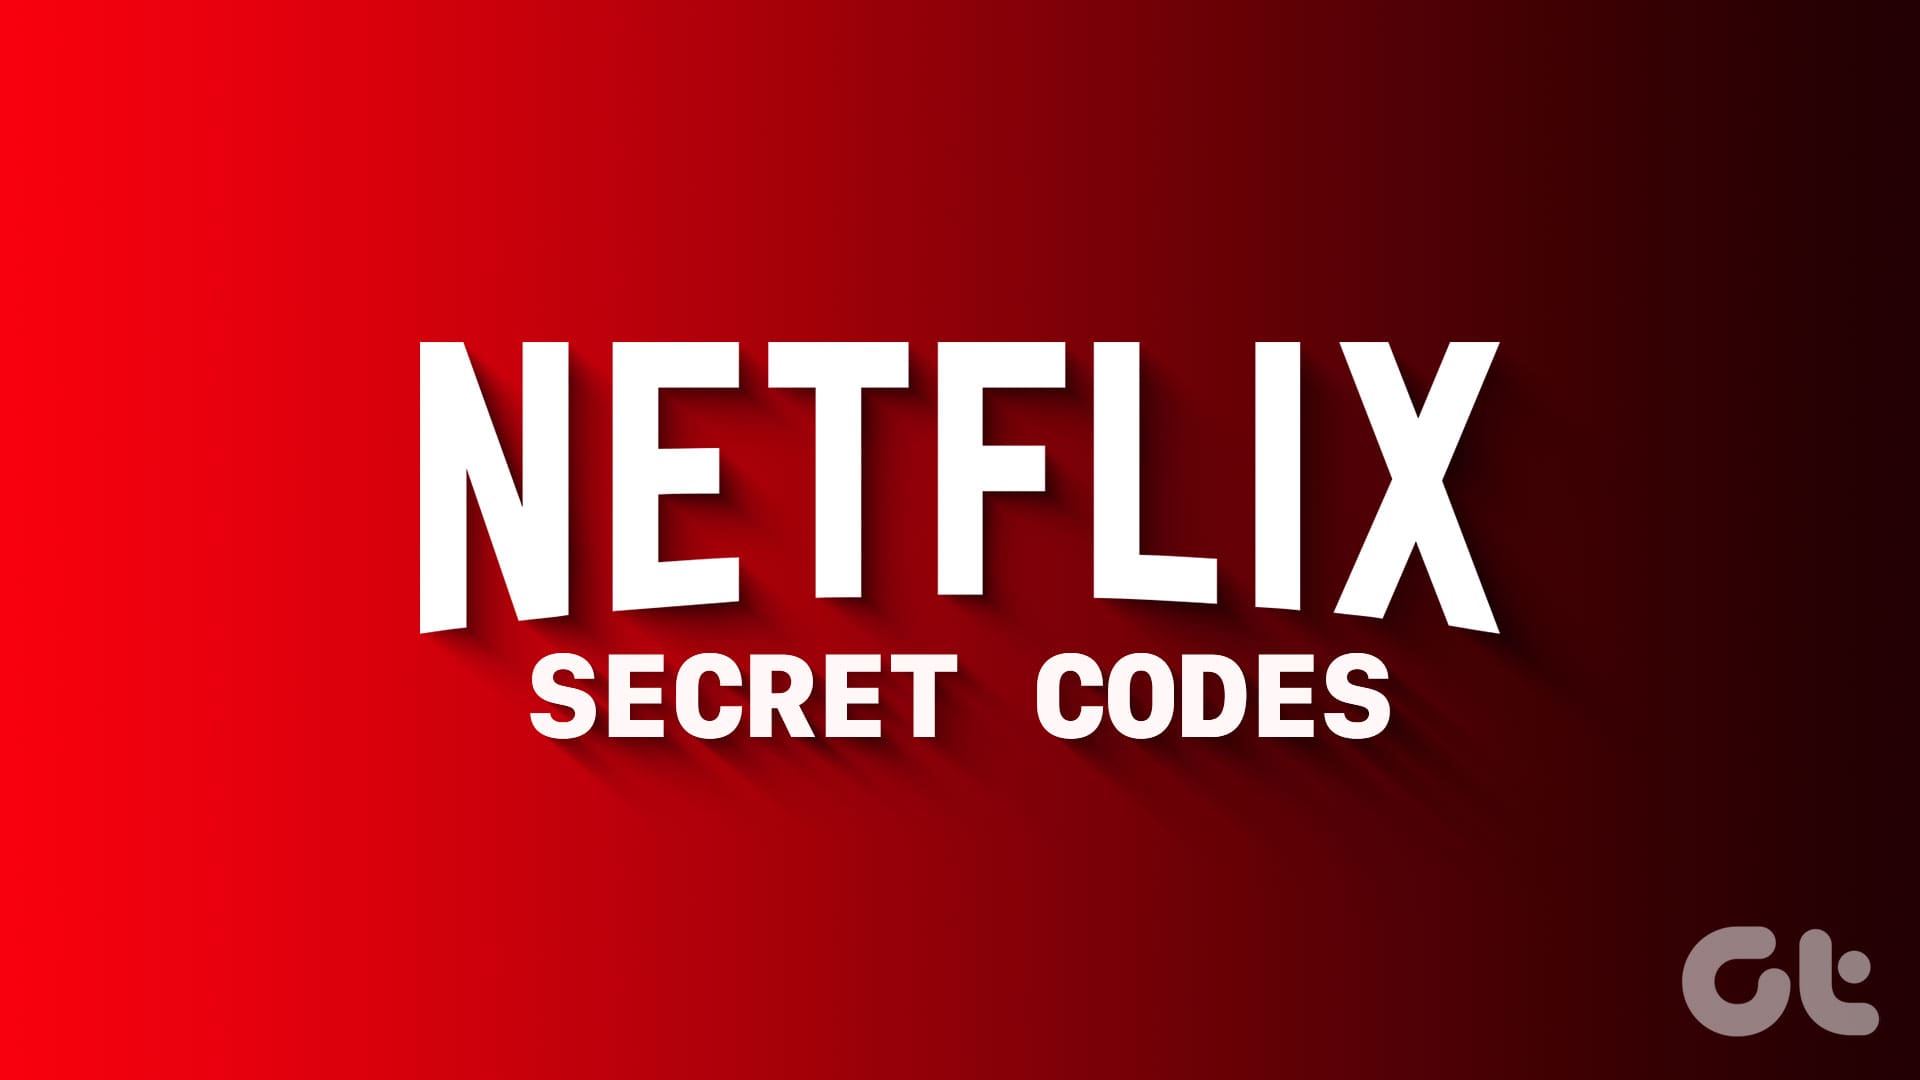 Secret Netflix Codes To Unlock Scary Movies And TV Shows For Halloween